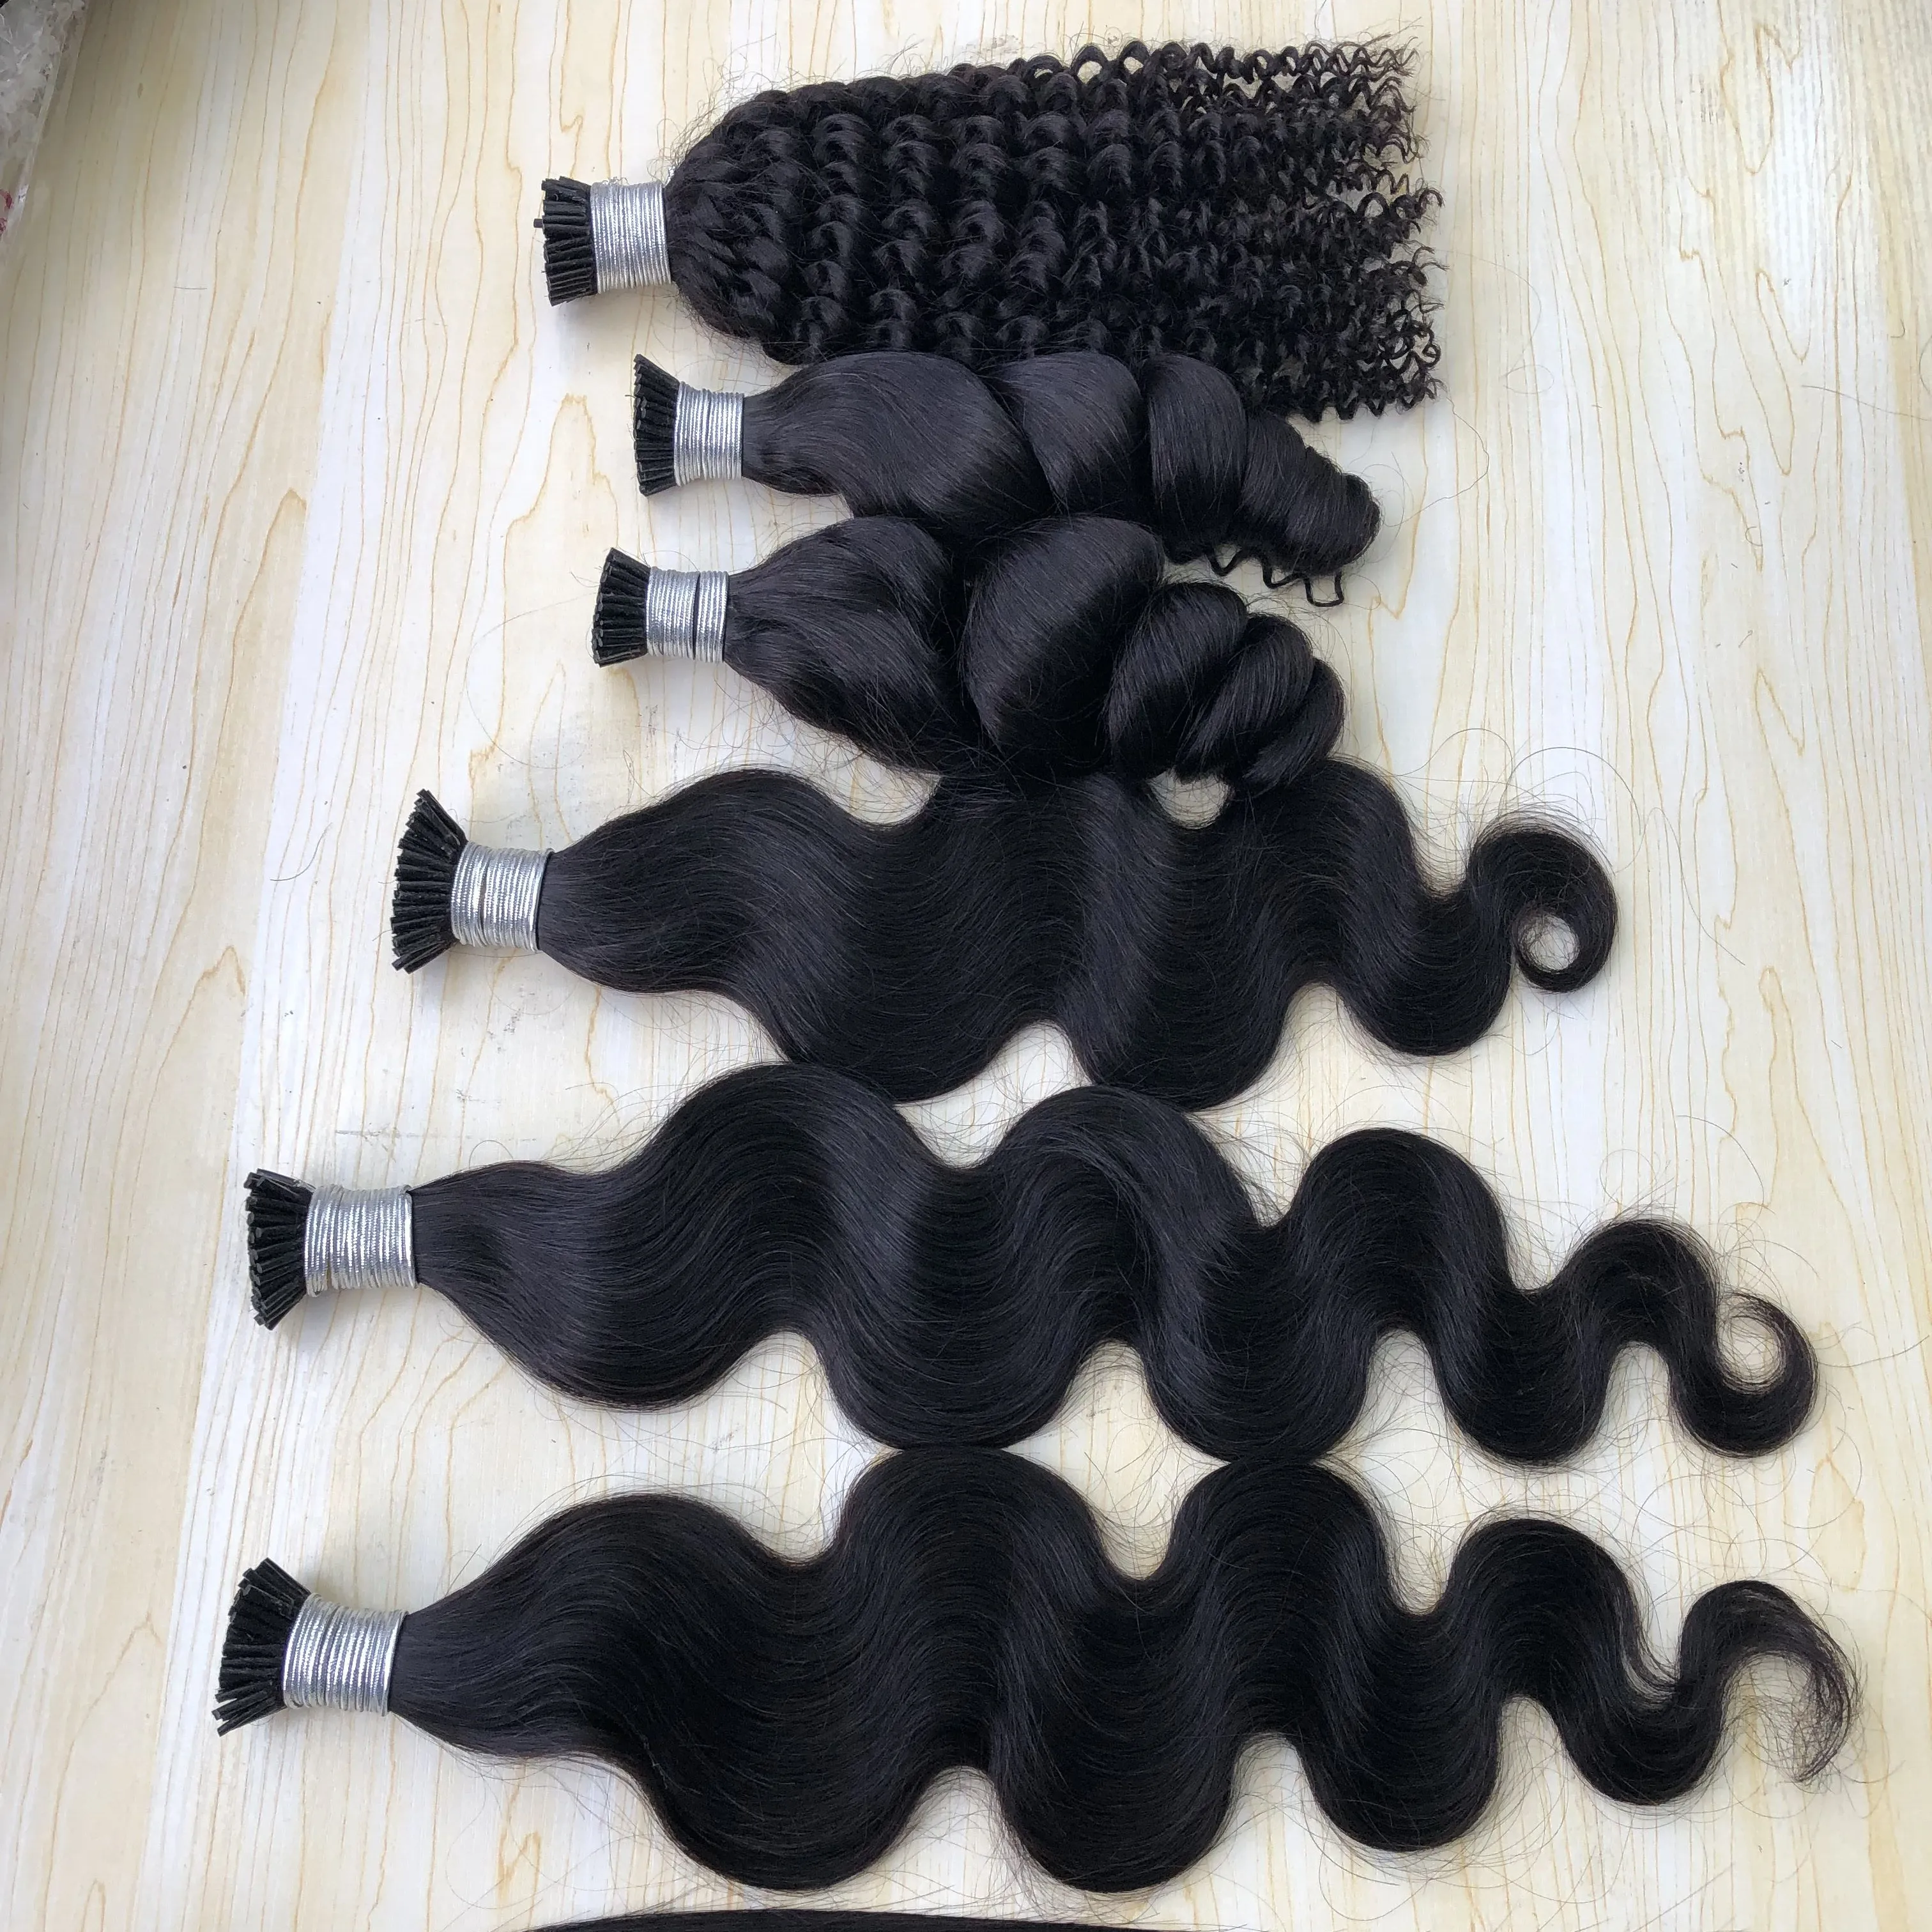 Curly loose deep wave russian indian micro links virgin remy human hair keratin prebonded i tip hair extensions